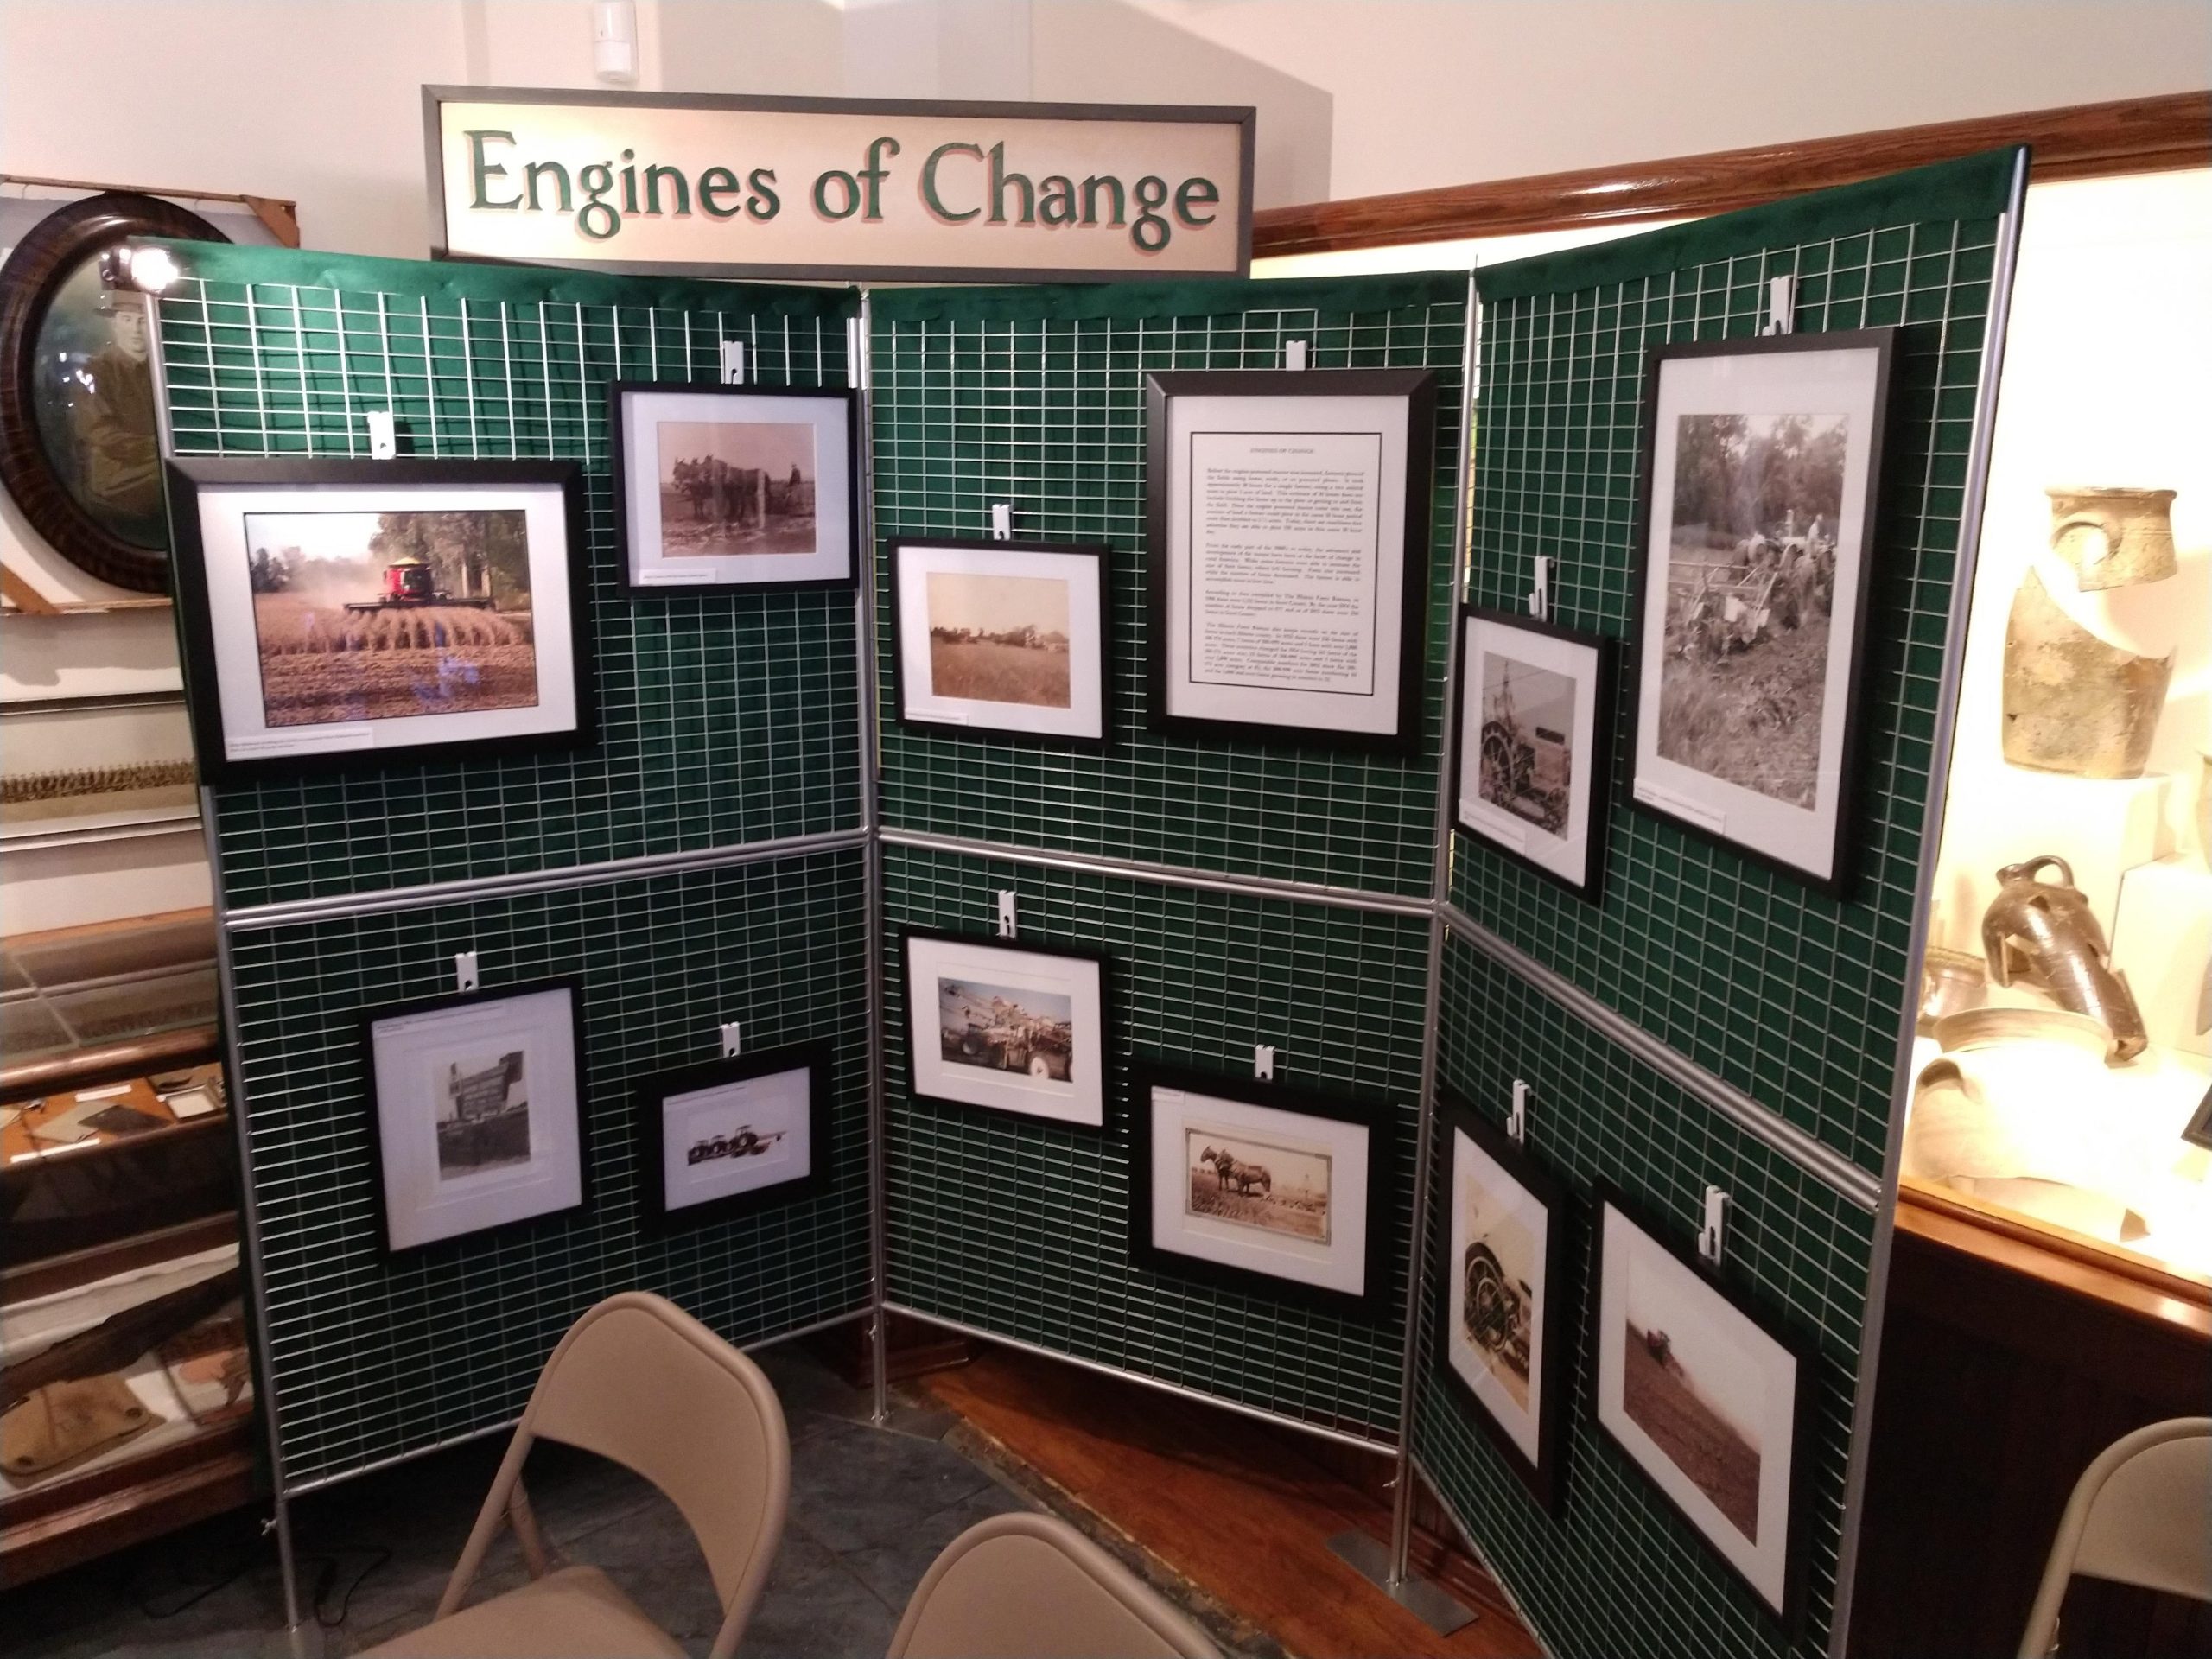 Photograph of “Engines of Change,” a section of the companion exhibition produced by the Old School Museum.